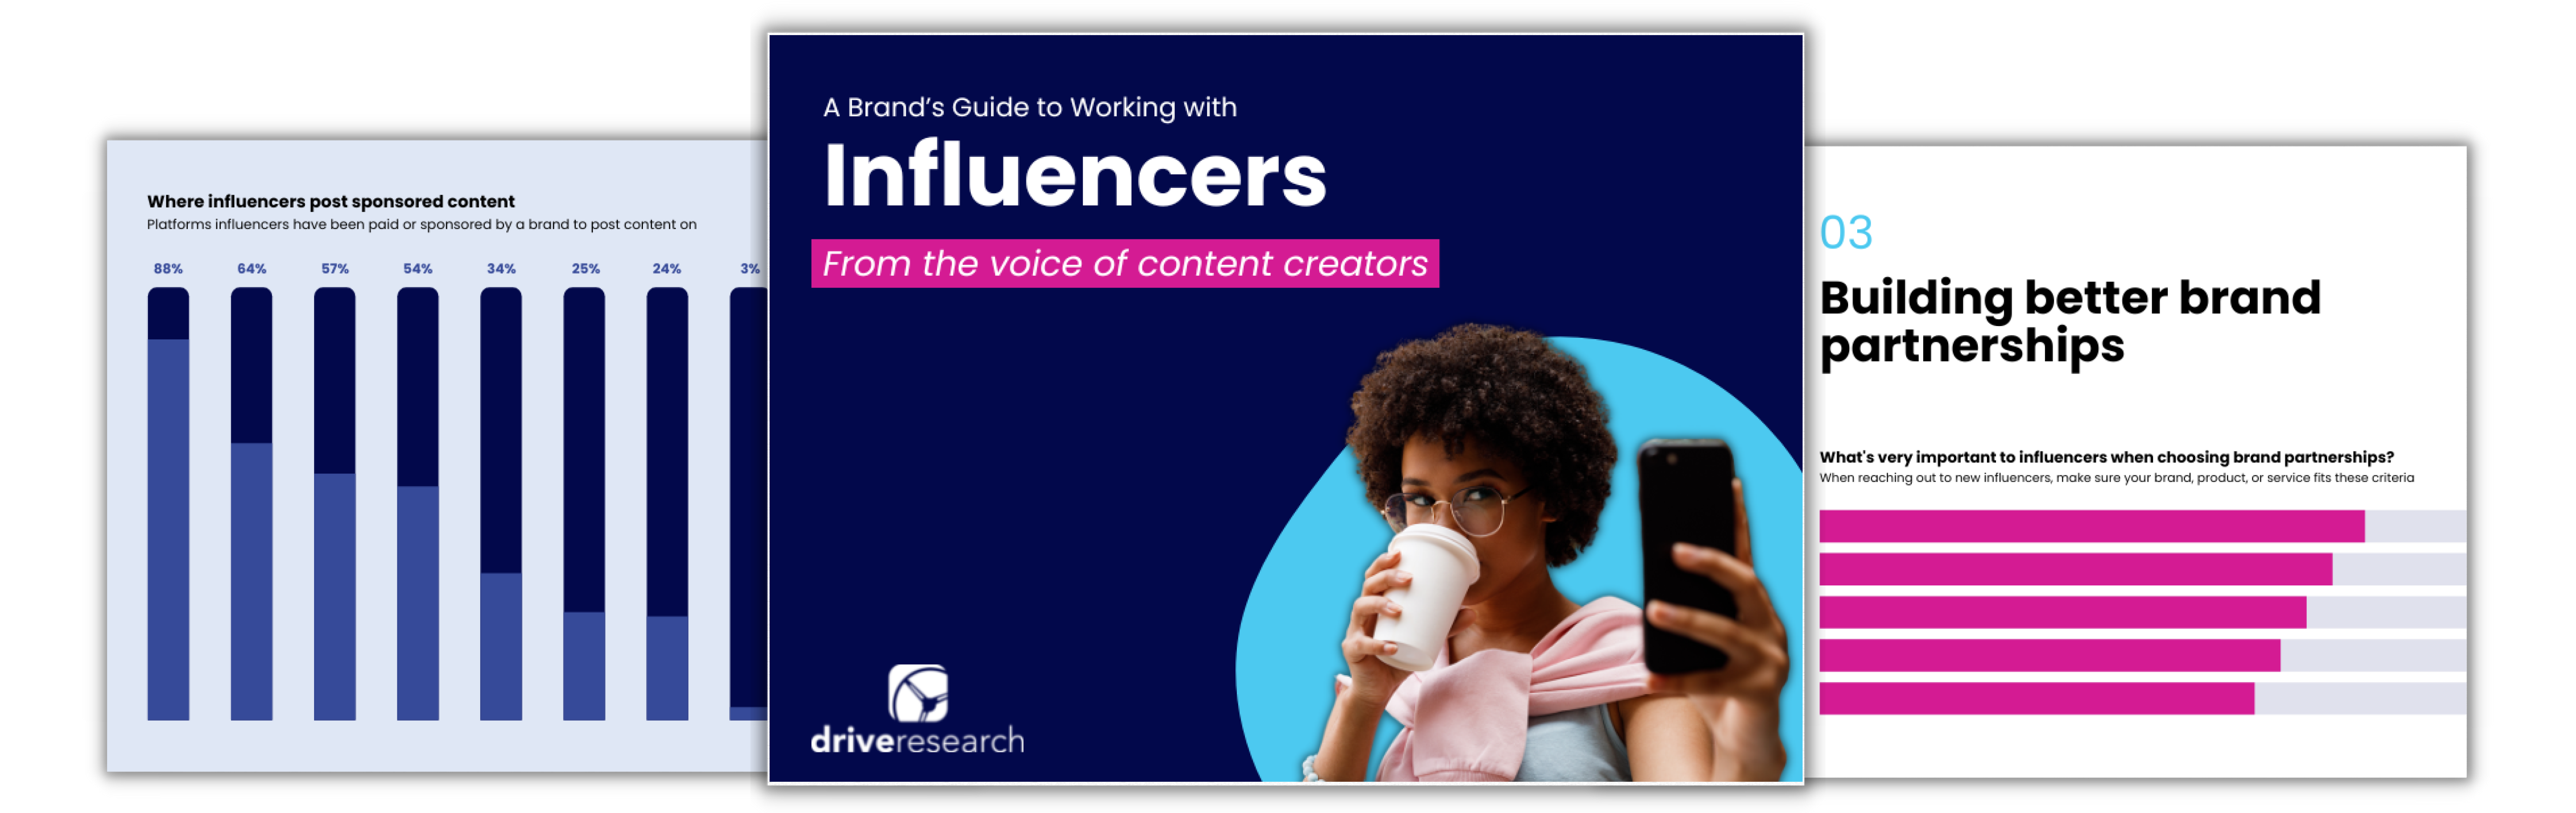 influencer report - drive research